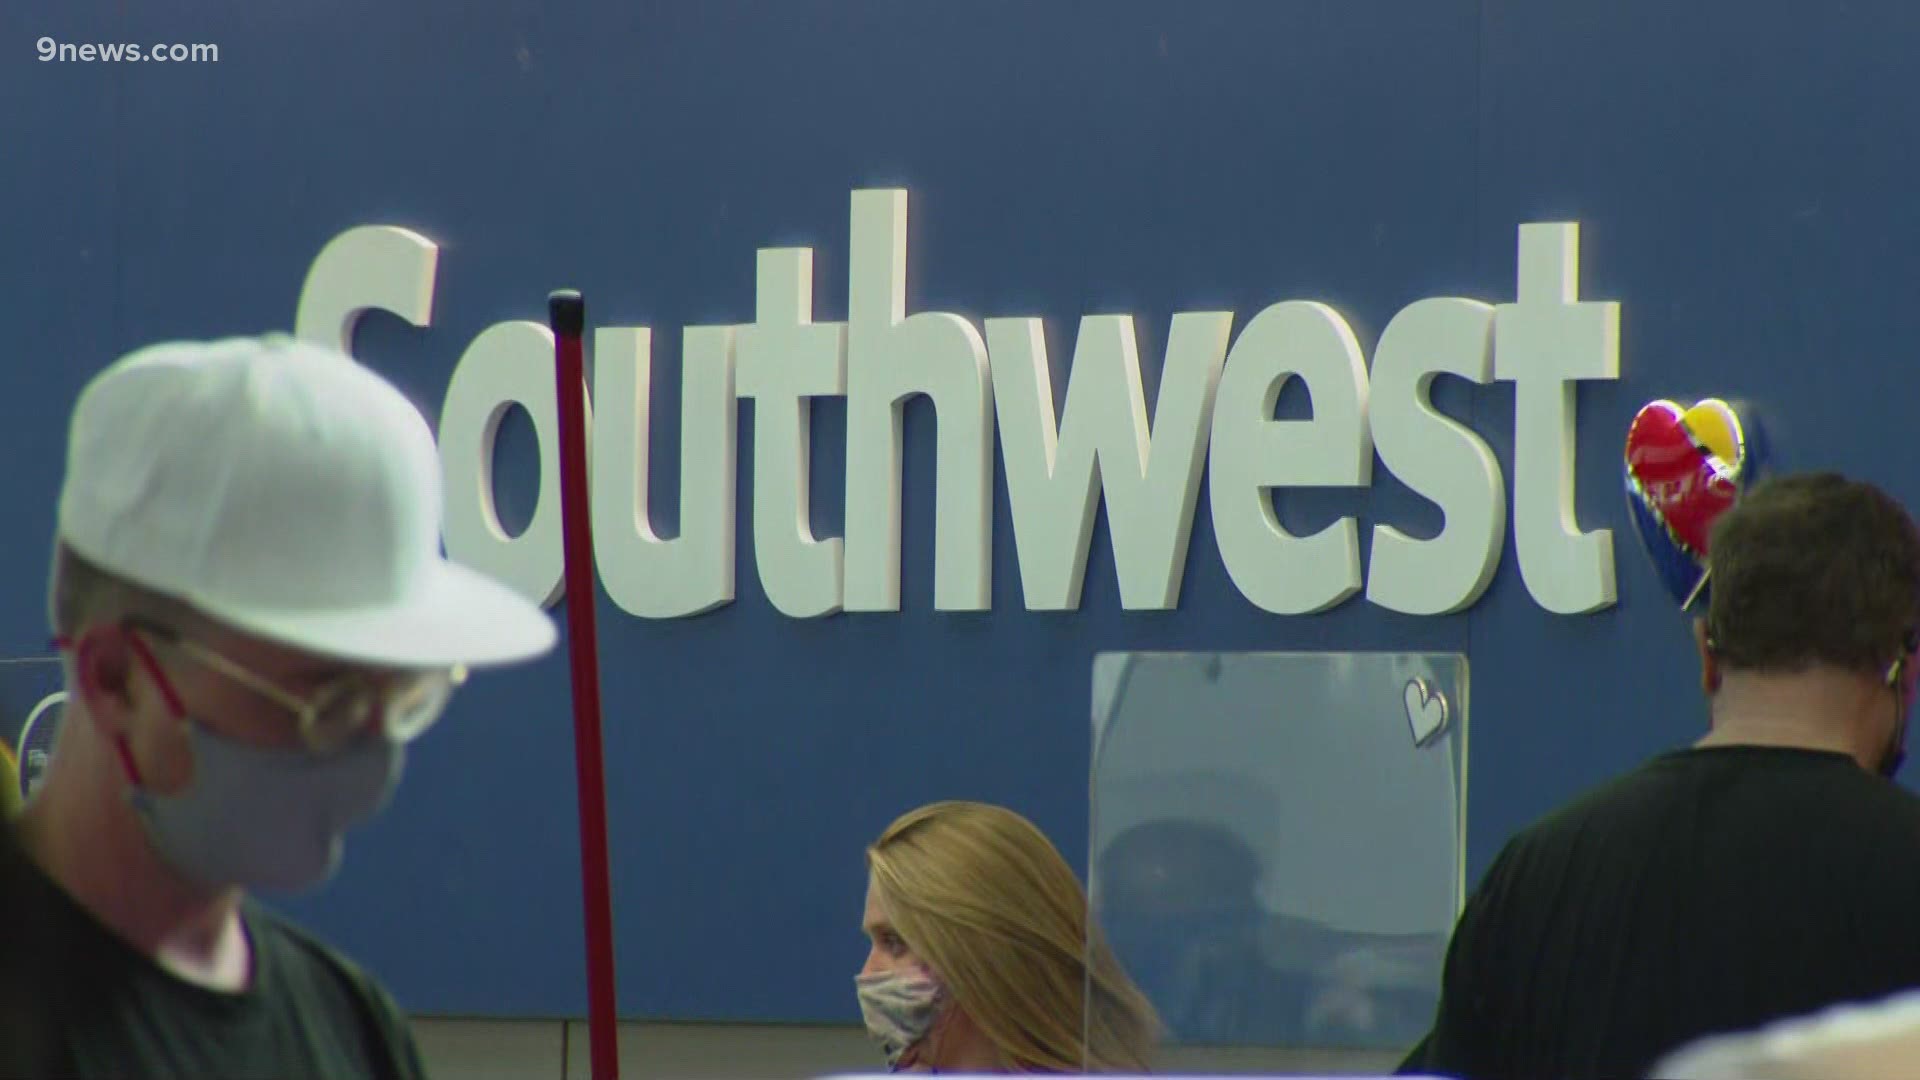 Southwest is working to resume operations after asking the FAA to ground its planes while a "reservation computer issue" is fixed that's caused delays nationwide.